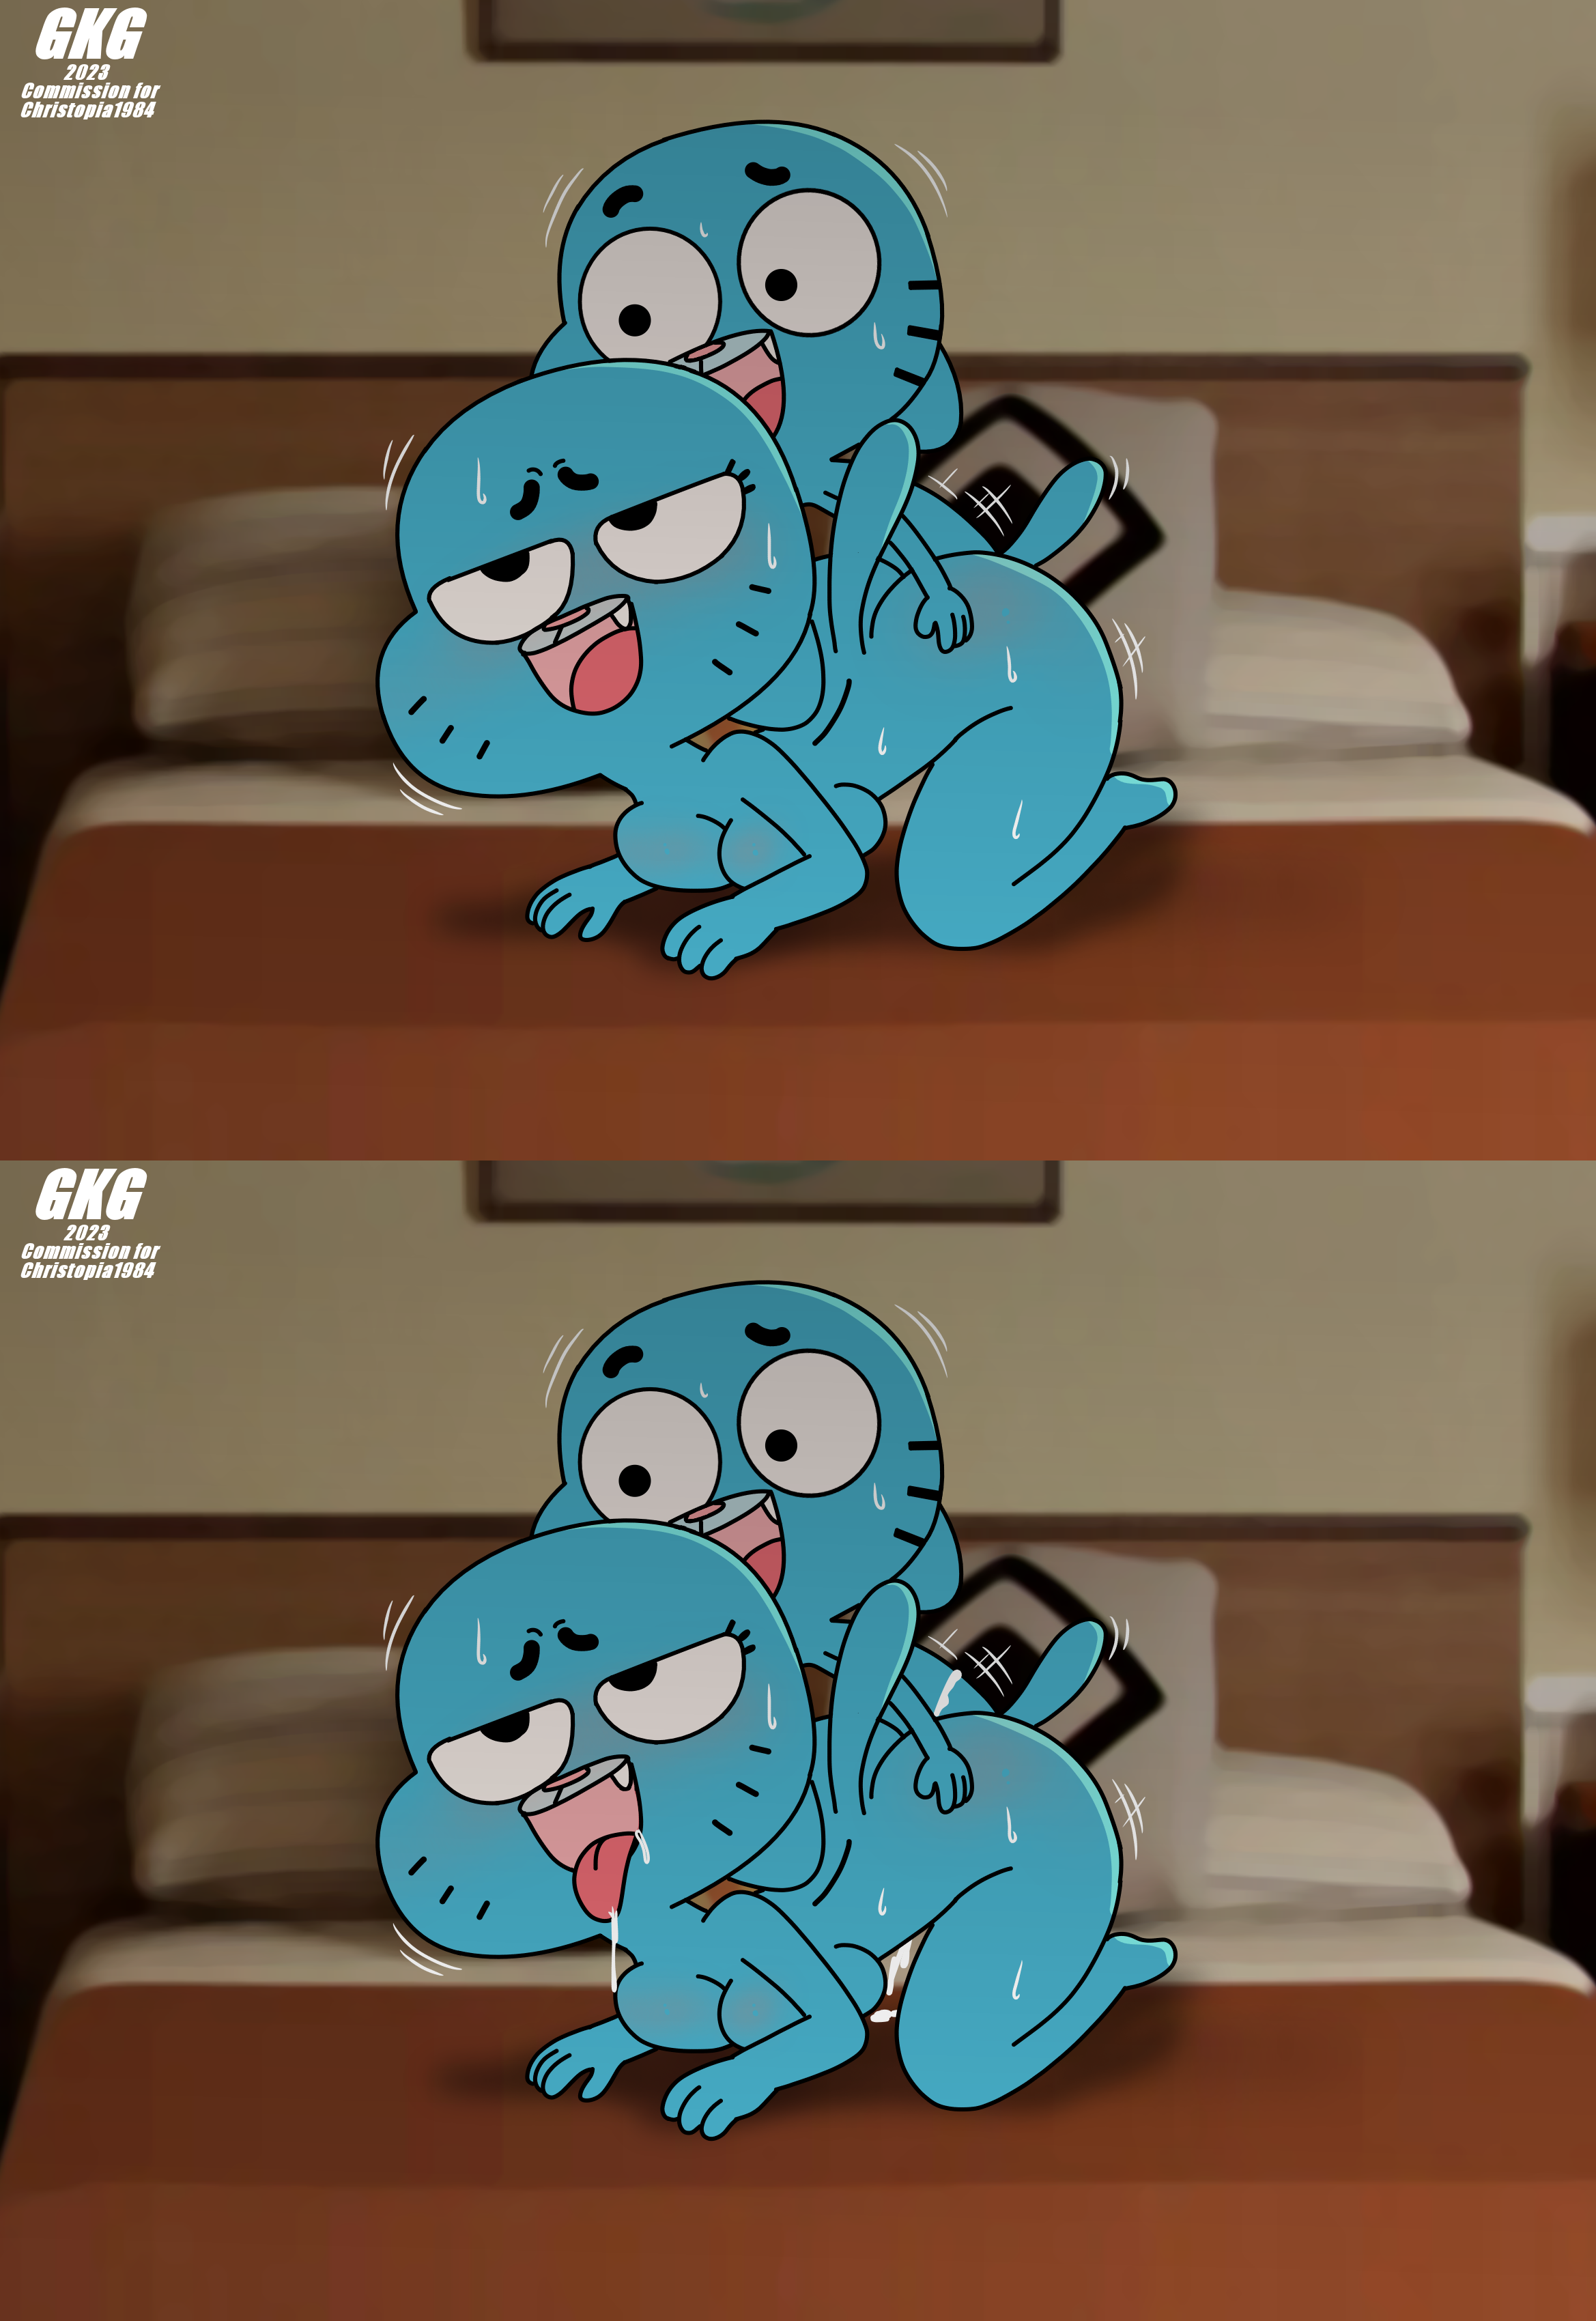 christ reynald putra recommends gumball rule 34 pic